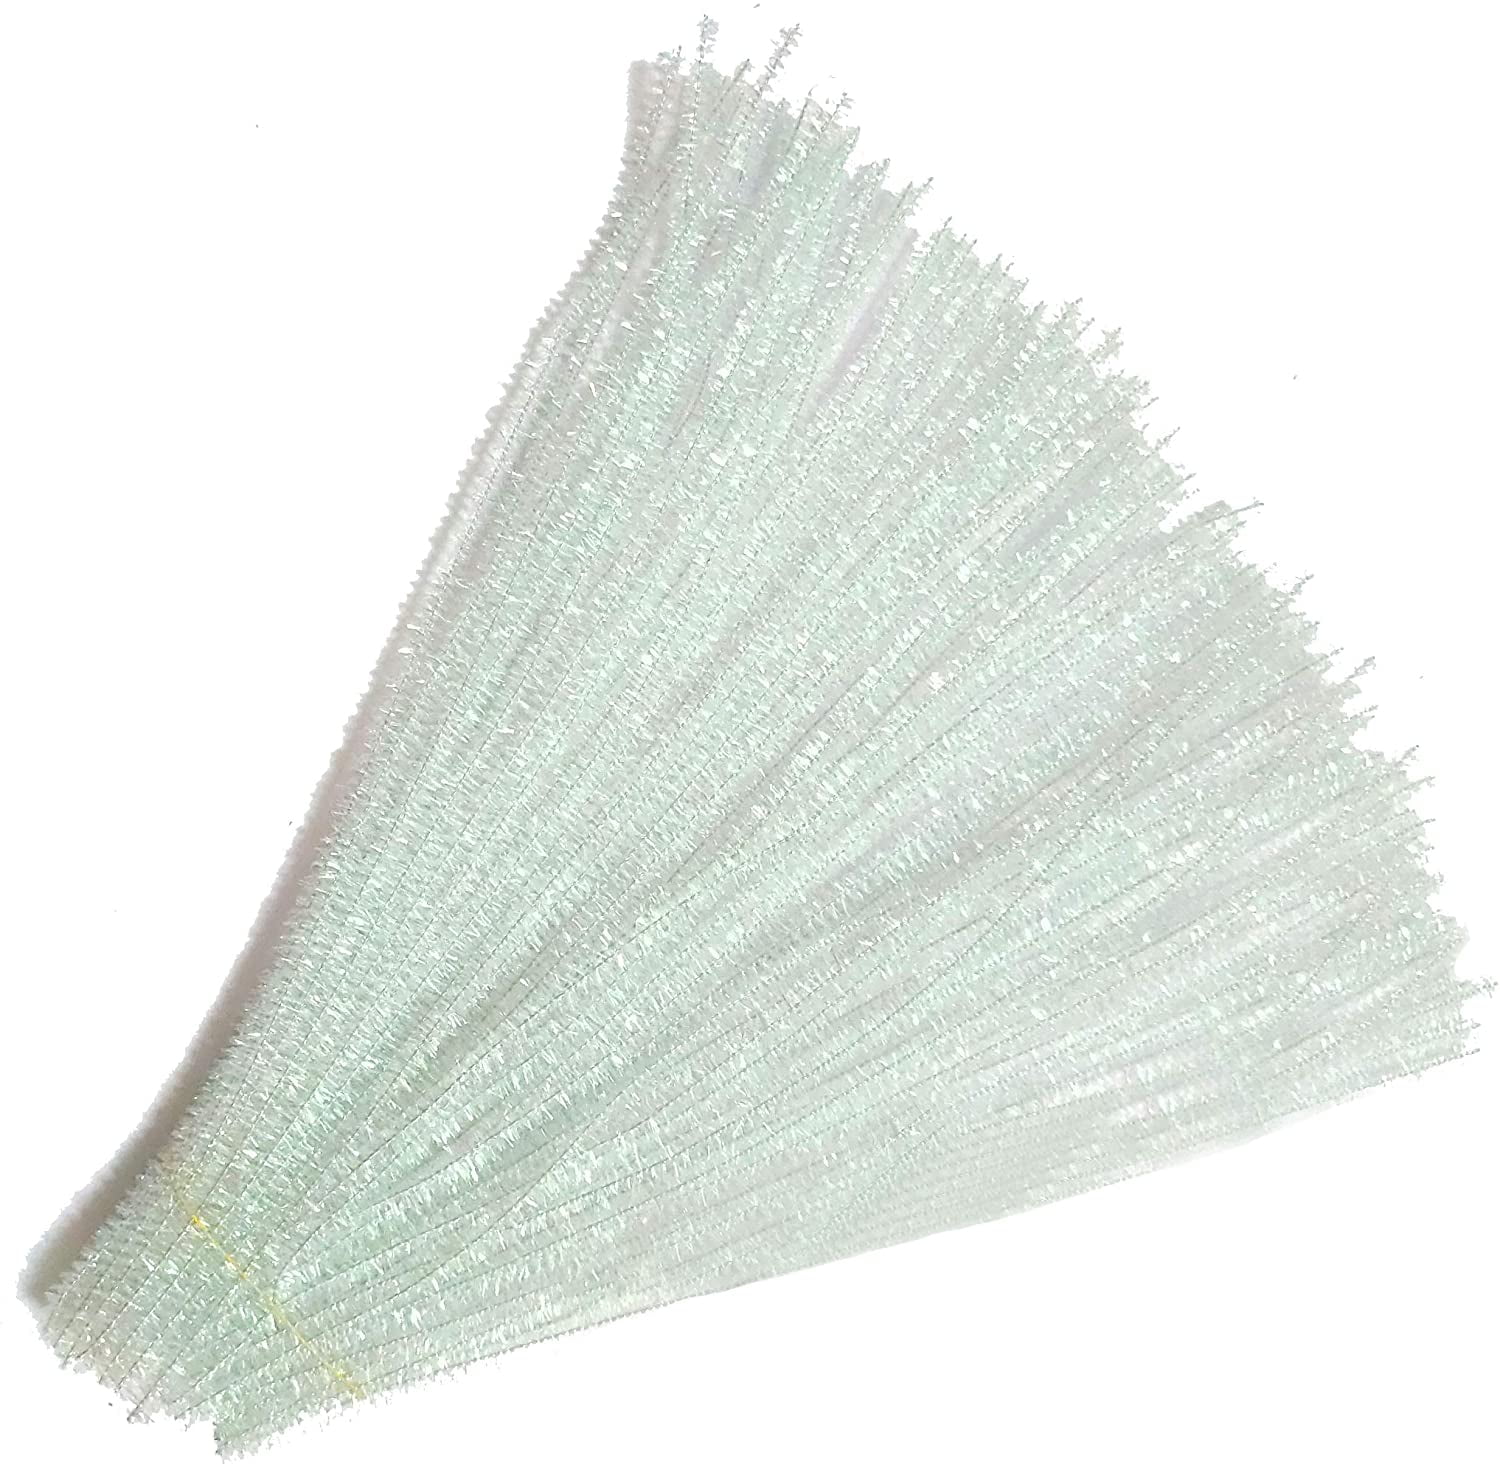 Make Shoppe Tinsel Chenille Stem, Iridescent, 30 Count, 6Mm X 12Inch